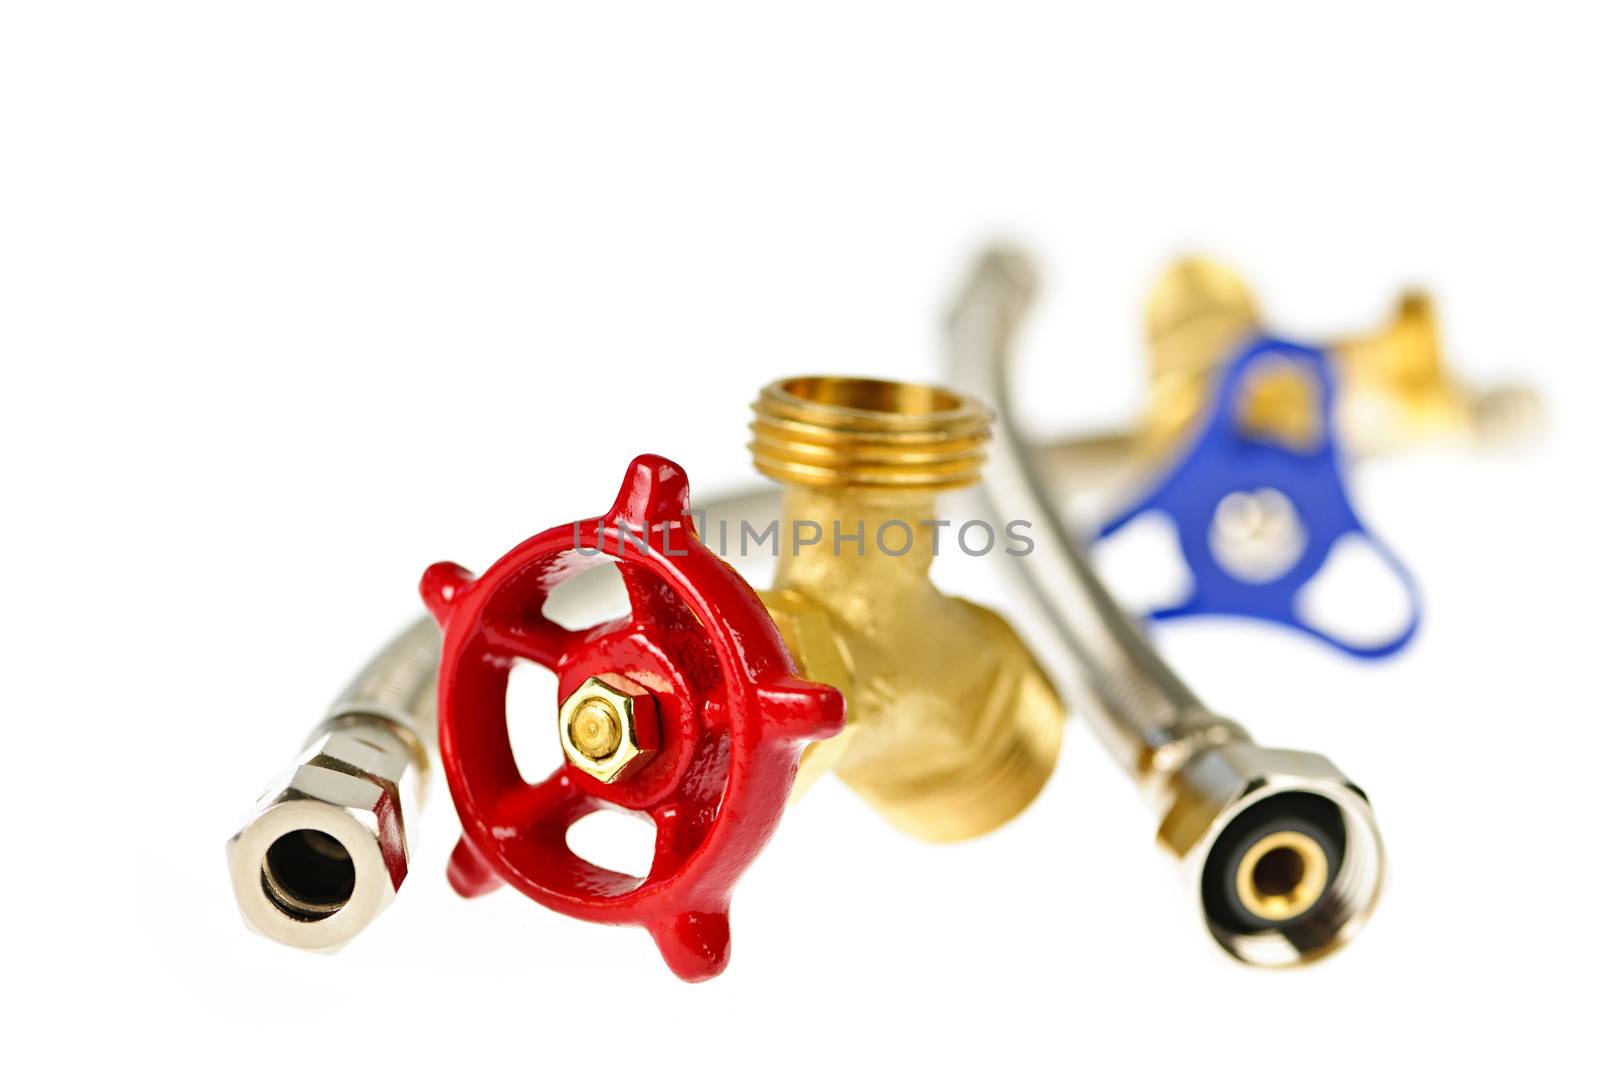 Isolated plumbing valves hoses and assorted parts